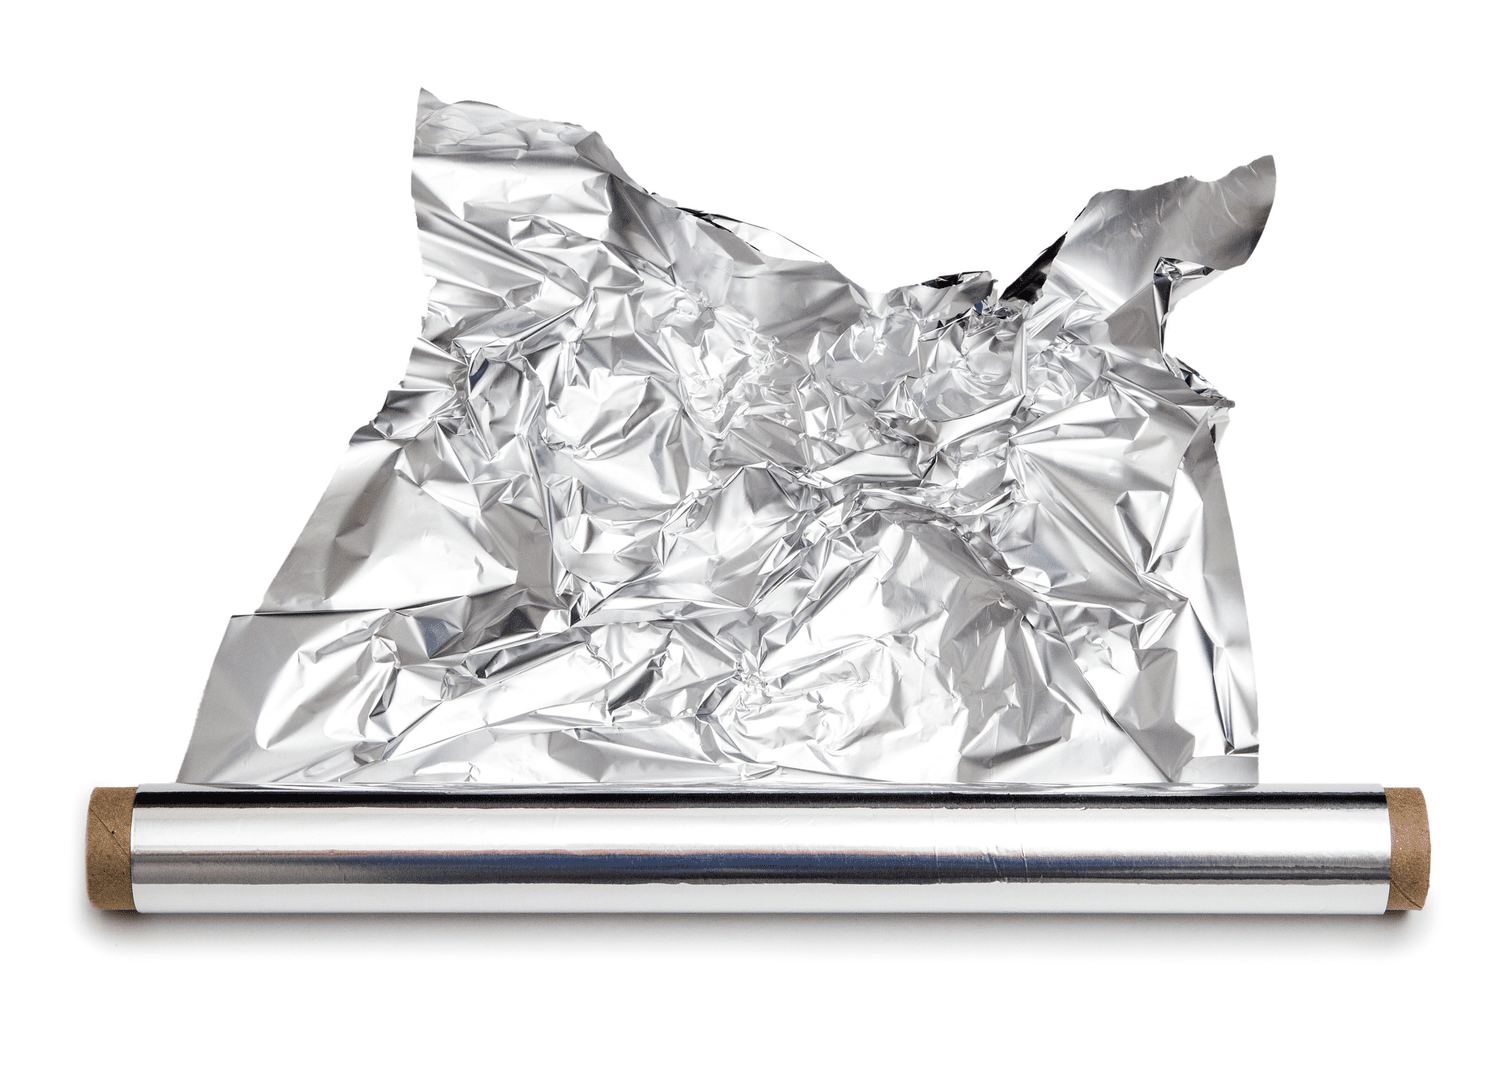 5 Clever Ways to Use Aluminum Foil to Clean Your Kitchen